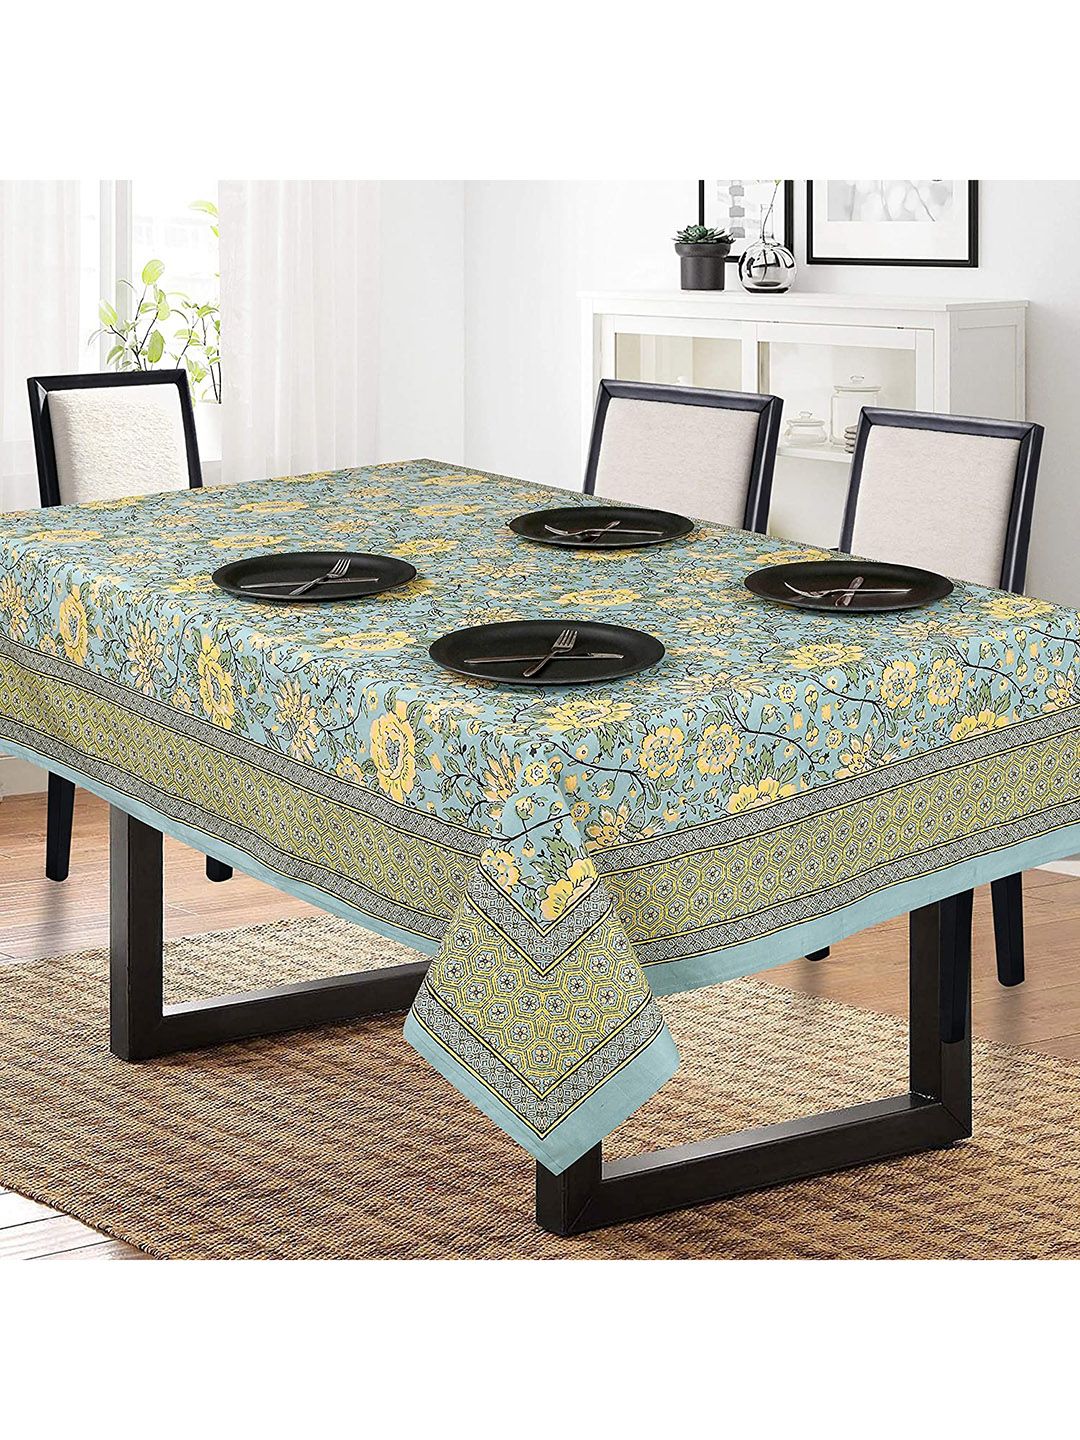 SHADES of LIFE Turquoise Blue & Yellow Floral Printed Solid Cotton 6-Seater Table Covers Price in India